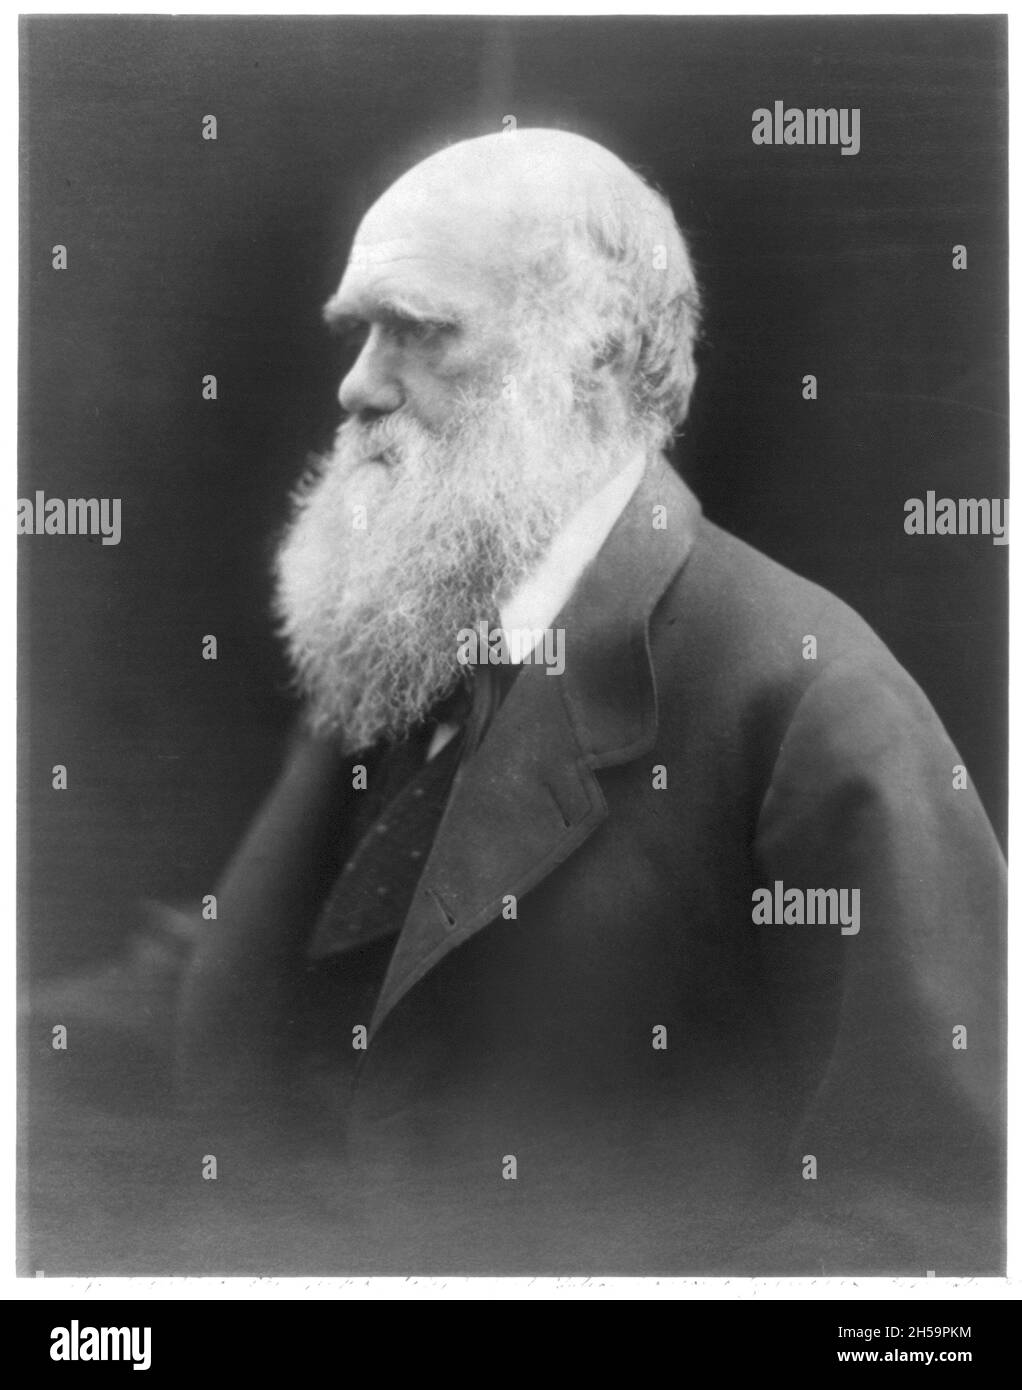 Vintage photograph circa 1880 of Charles Darwin the famous naturalist and author of On the Origin of Species and proponent of the theory of evolution. Stock Photo